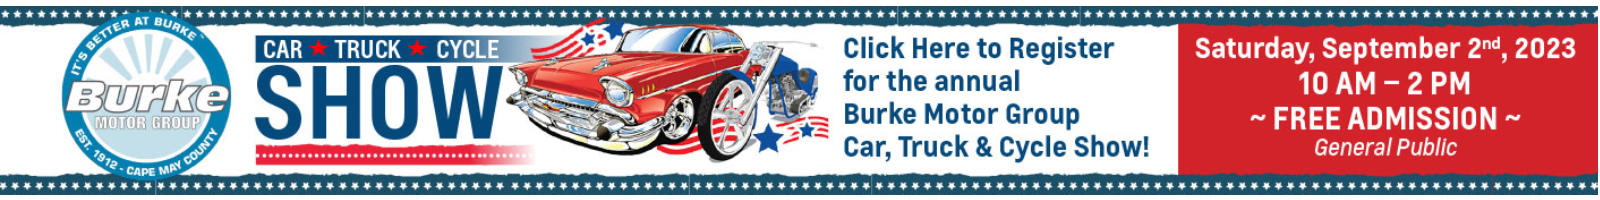 Click Here to Register for the annual Burke Motor Group Car, Truck & Cycle Show!